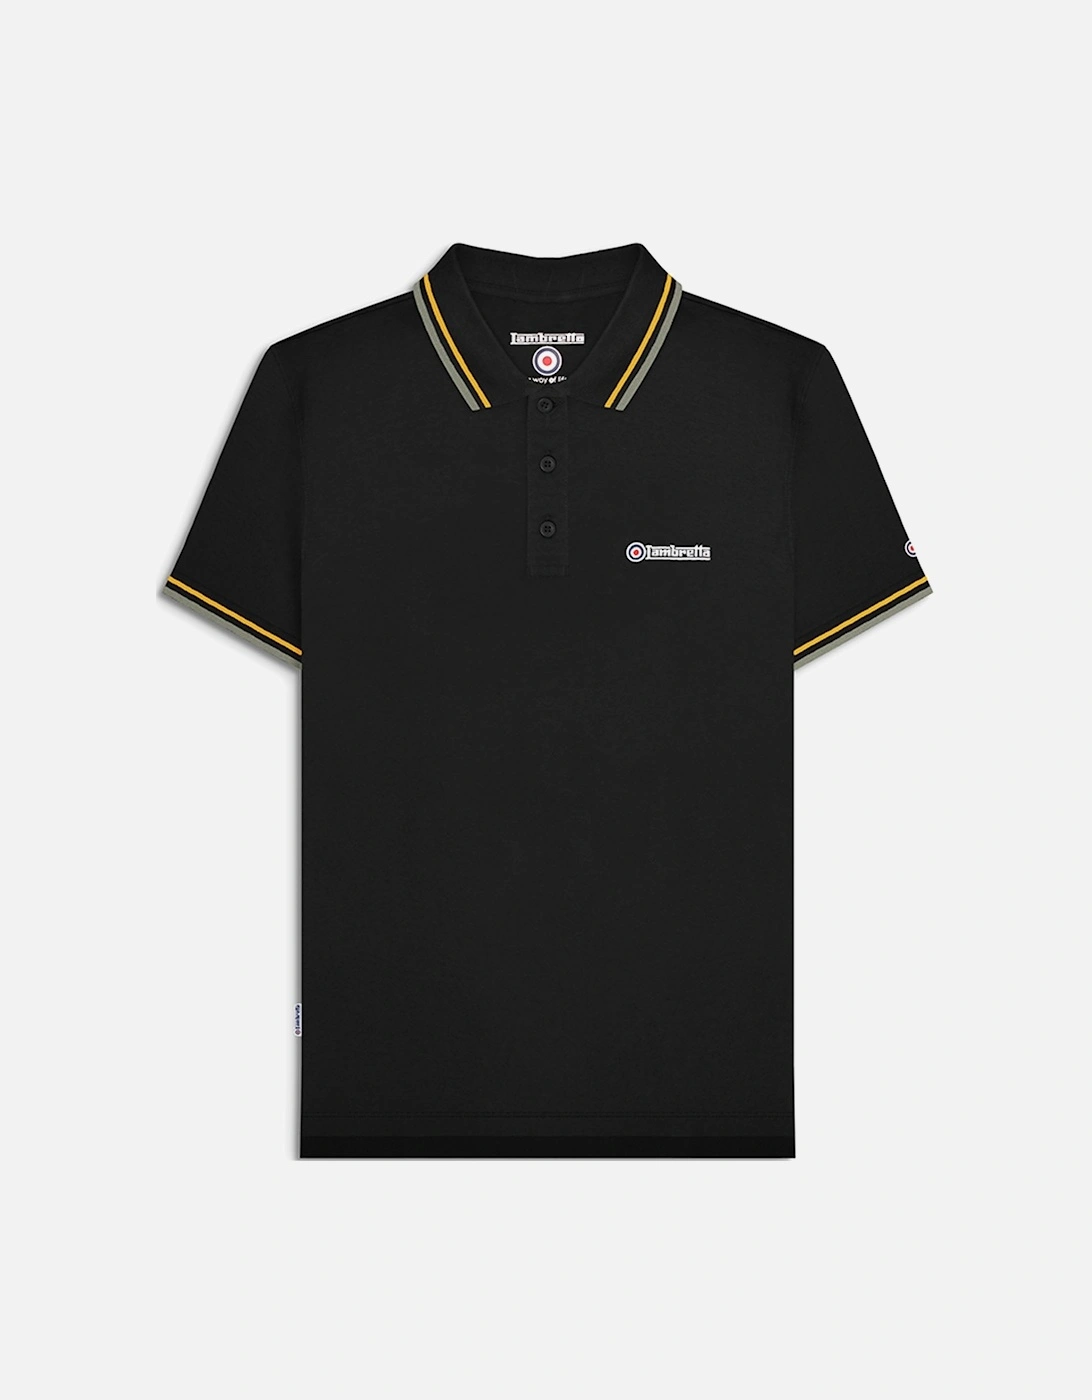 Mens Twin Tipped Retro Polo Shirt, 40 of 39